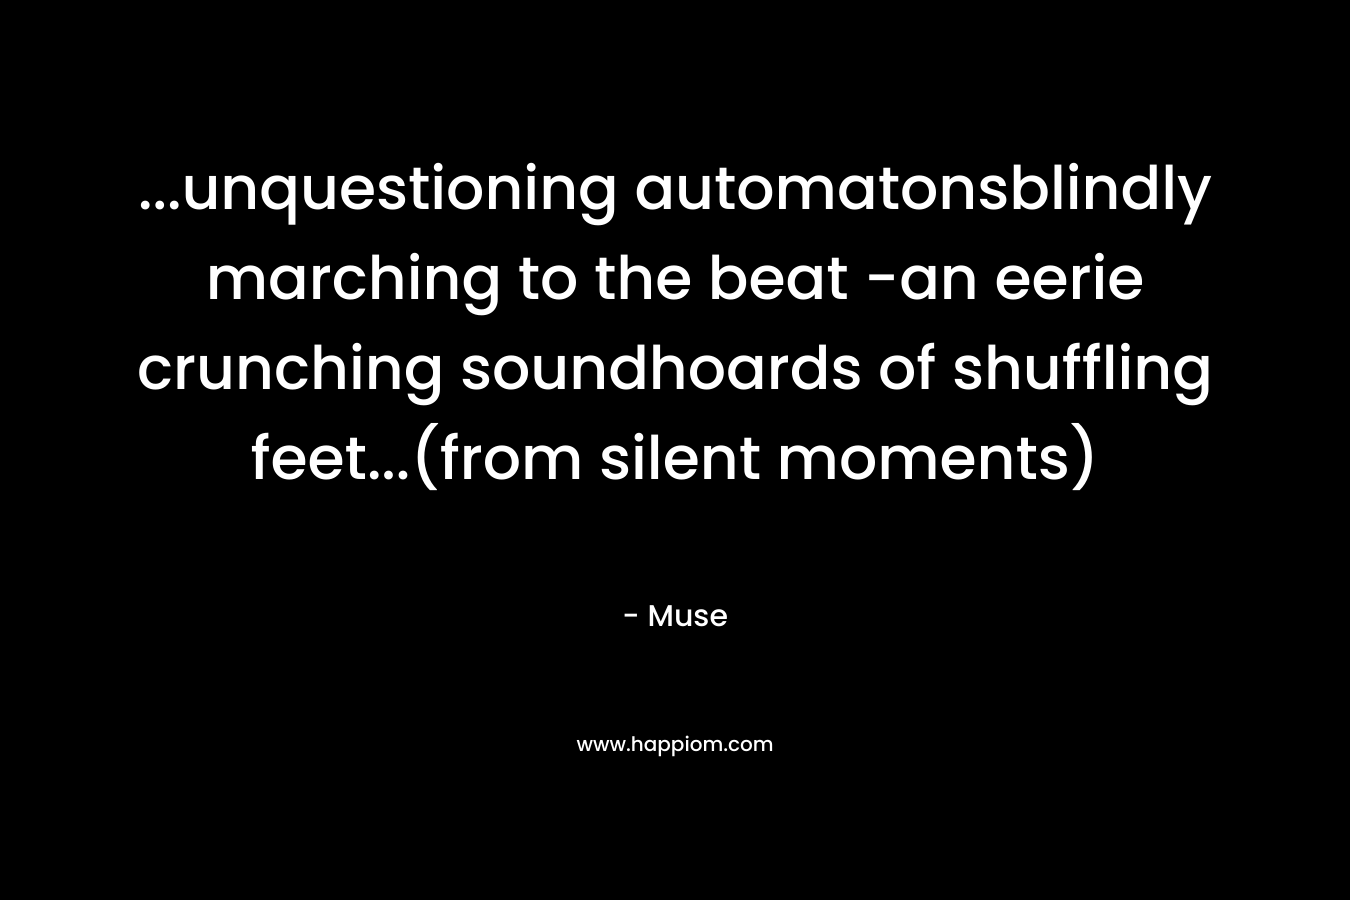 ...unquestioning automatonsblindly marching to the beat -an eerie crunching soundhoards of shuffling feet...(from silent moments)